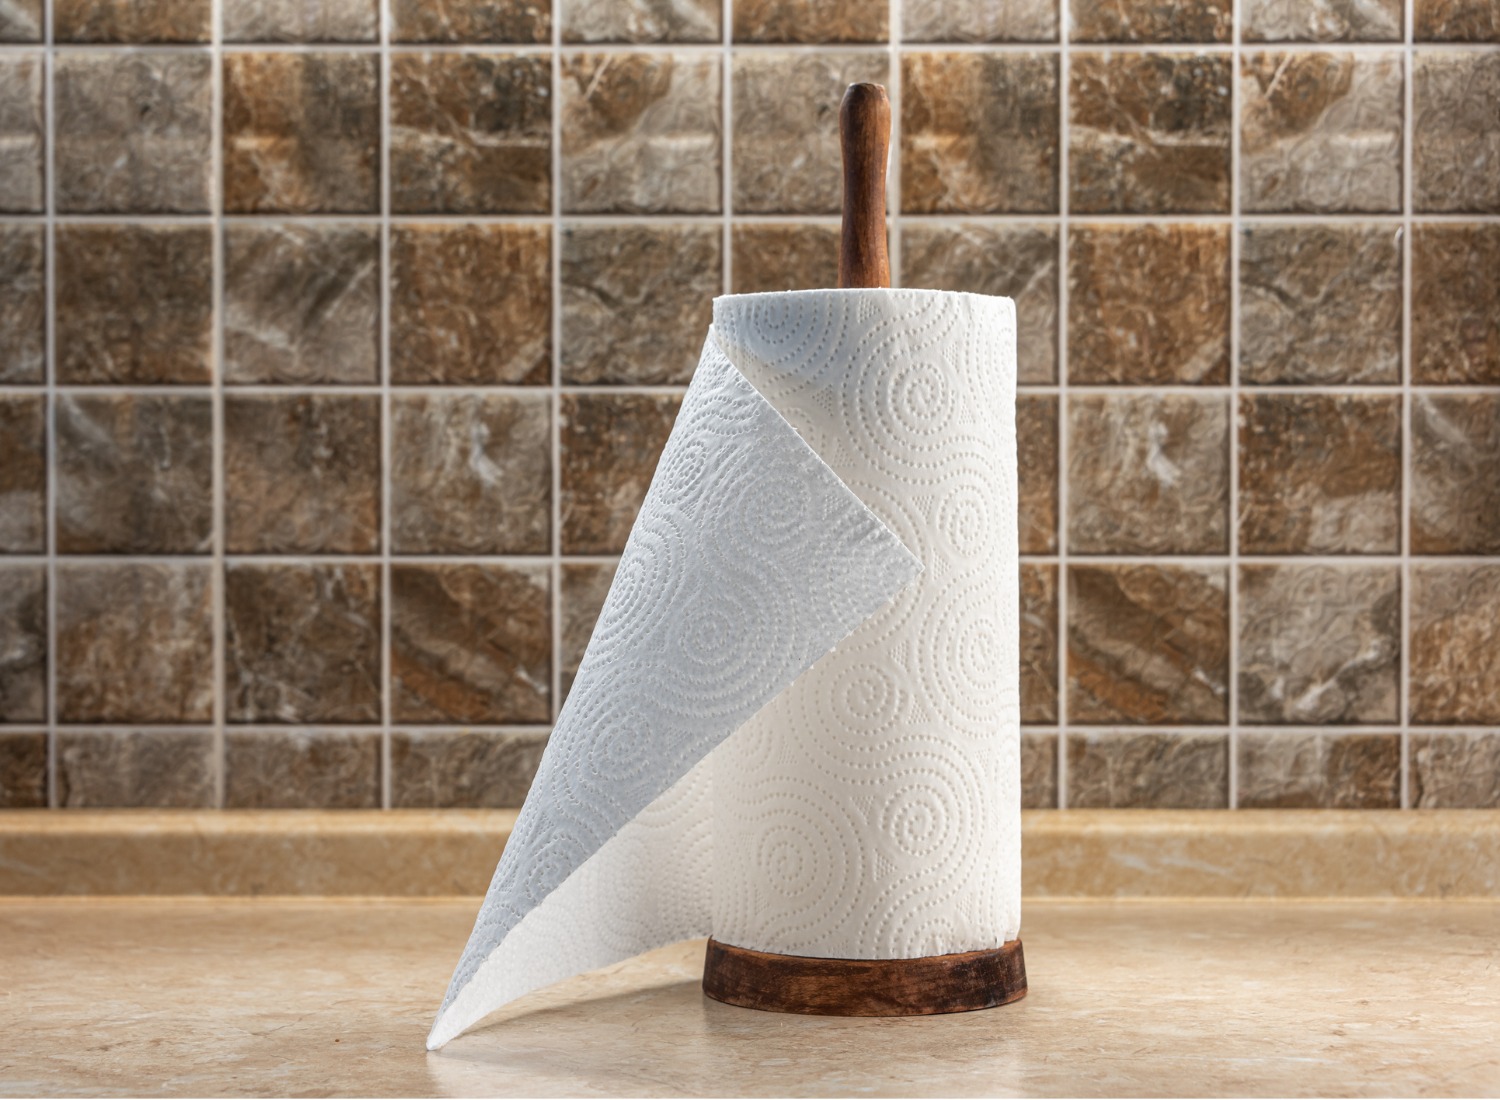 https://www.brit.co/reviews/wp-content/uploads/2023/10/paper-towels-on-a-wooden-holder-on-the-table-against-the-background-of-a-tiled-wall.jpg_s1024x1024wisk20cGViOS7Xvw4X37A7dxmkY4iAWBX7cunAGh_qXLUYkQUg-1.jpg